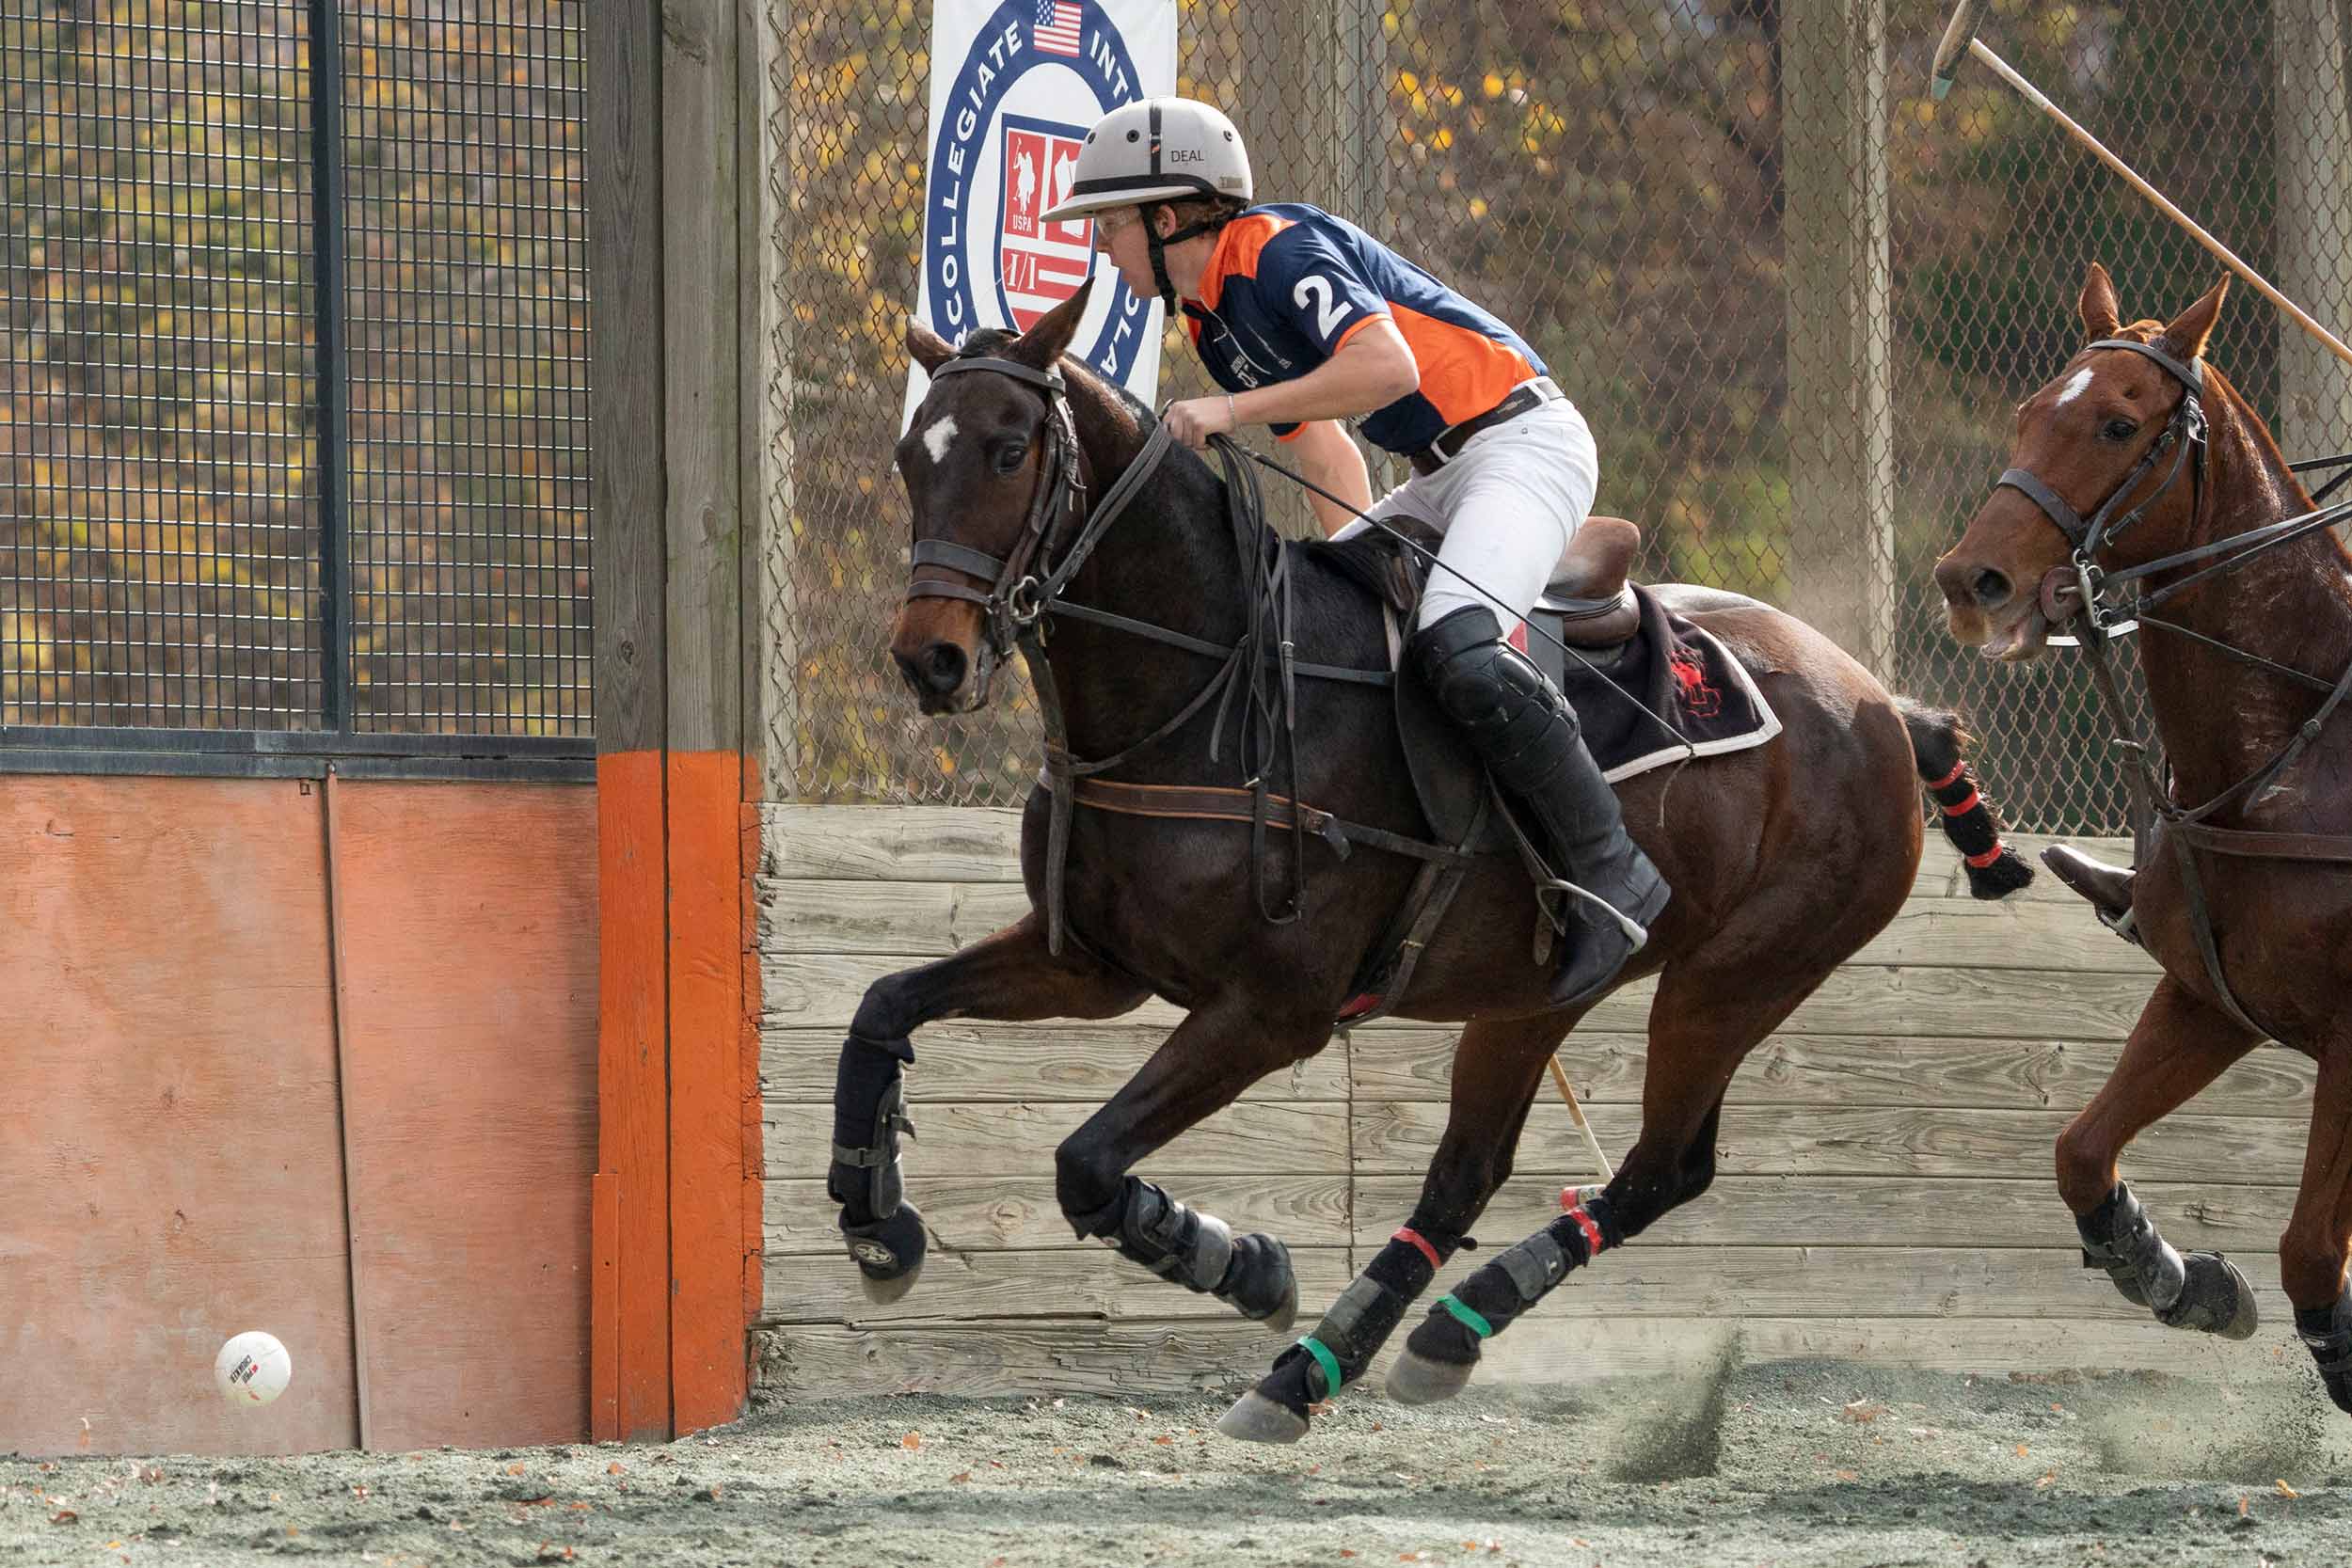 UVA polo player and horse running full speed after the ball